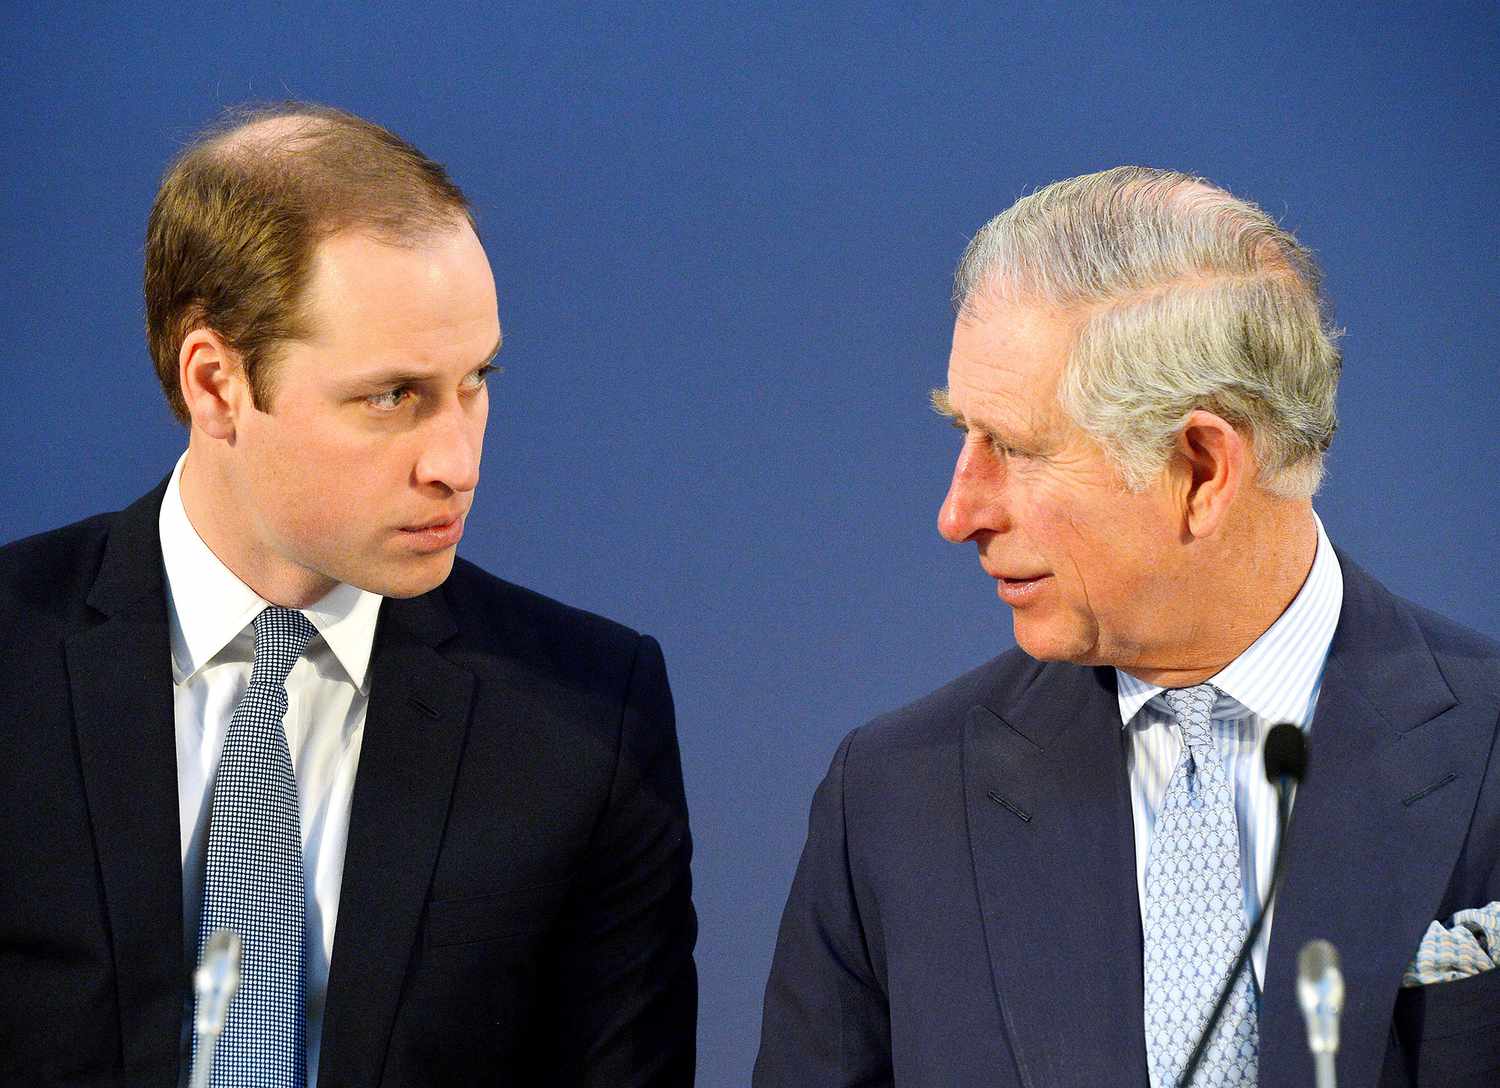 The Prince Of Wales & Duke Of Cambridge Attend The Illegal Wildlife Trade Conference